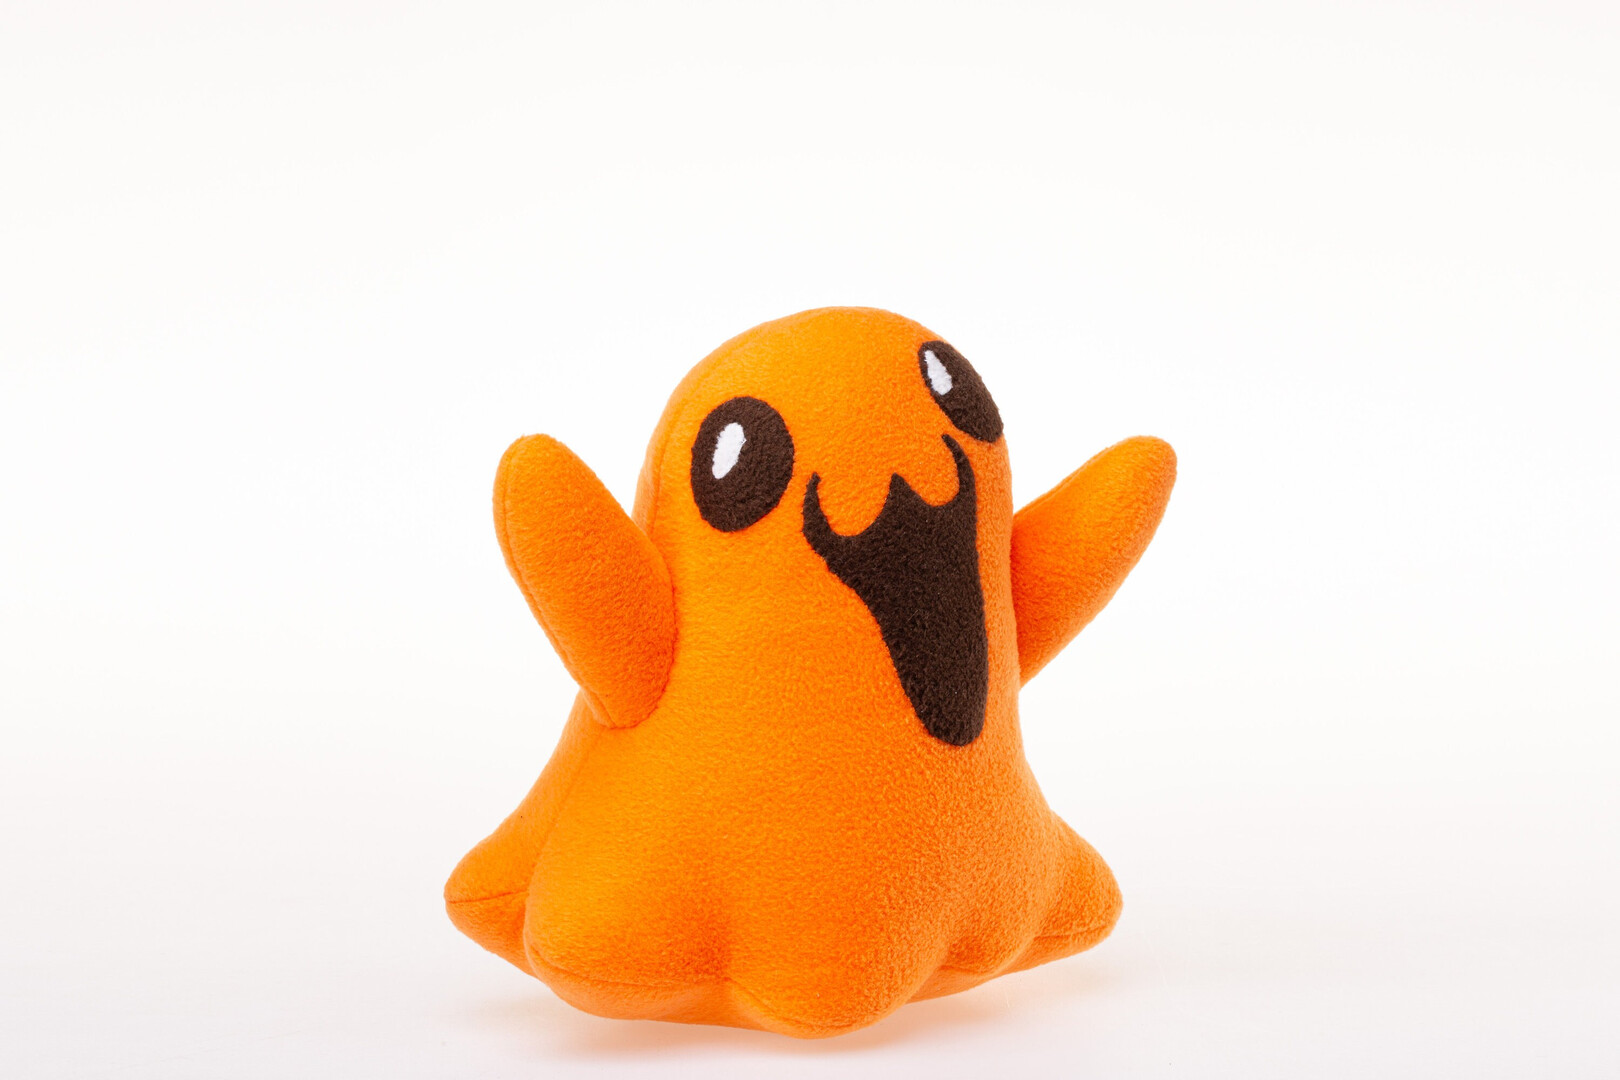 Check out this SCP 999 toy I made. You can get one through my